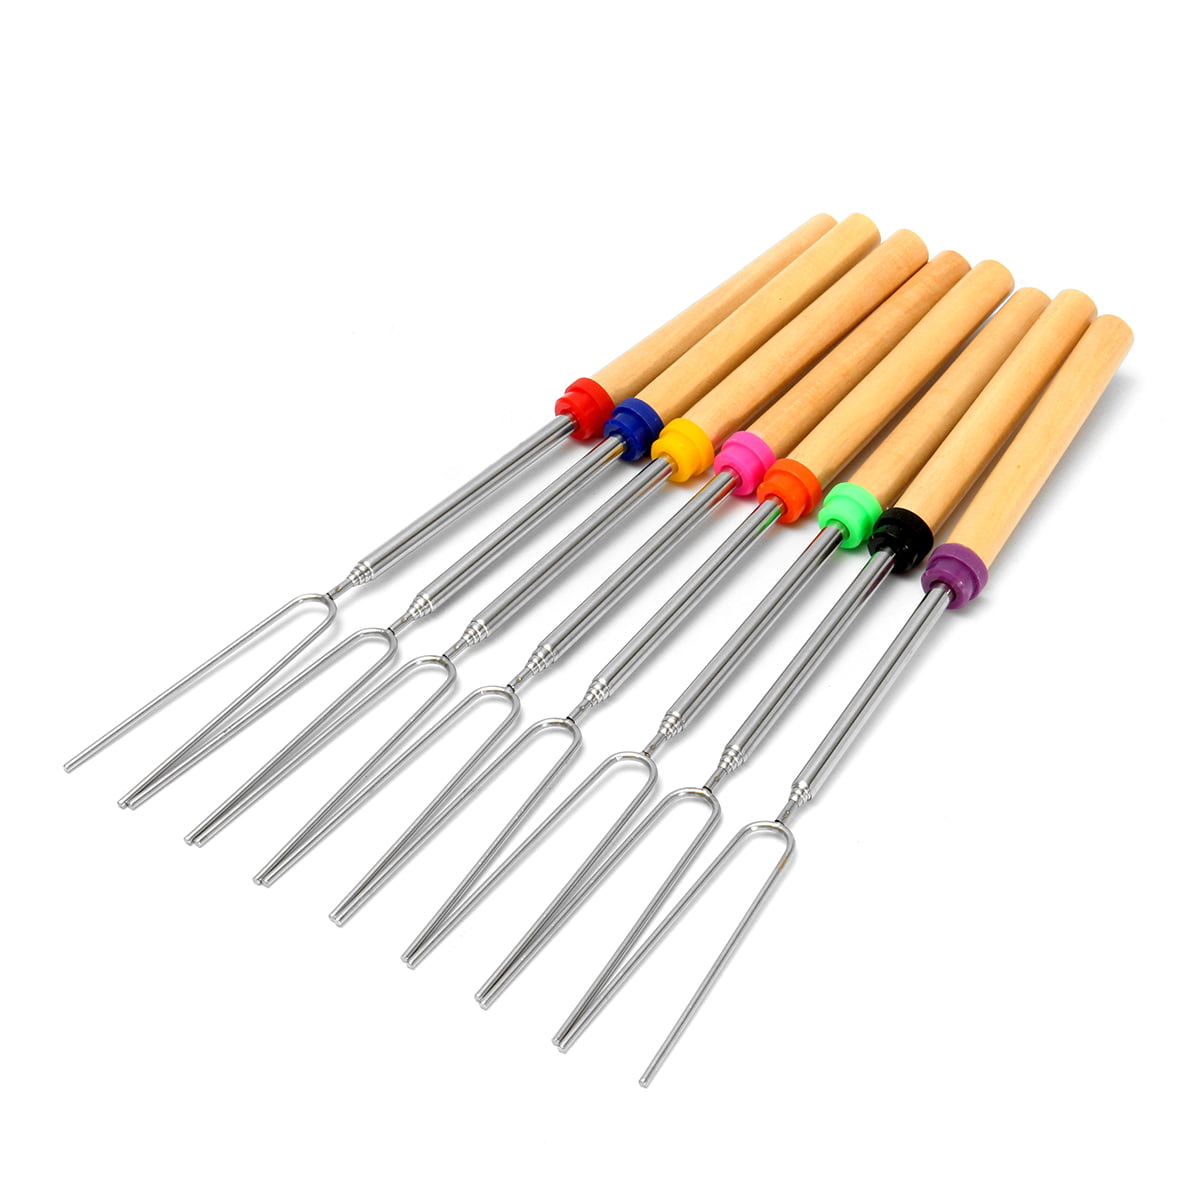 Barbecue Skewers Wood Handle Marshmallow Roasting Sticks Meat Hot Dog Fork 12pcs 